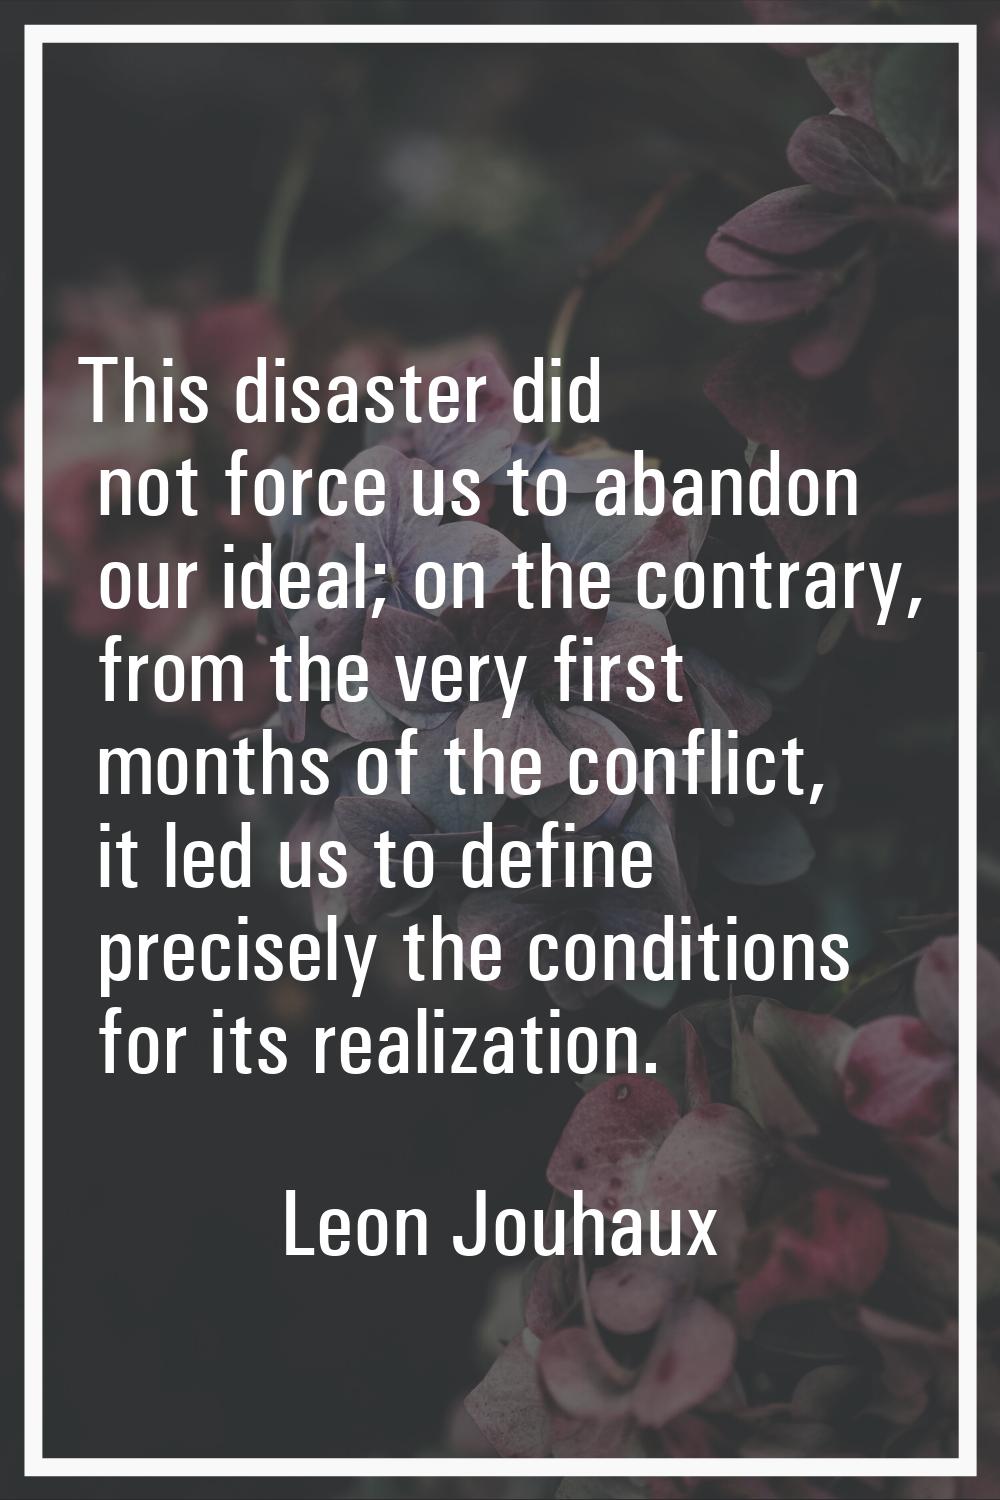 This disaster did not force us to abandon our ideal; on the contrary, from the very first months of